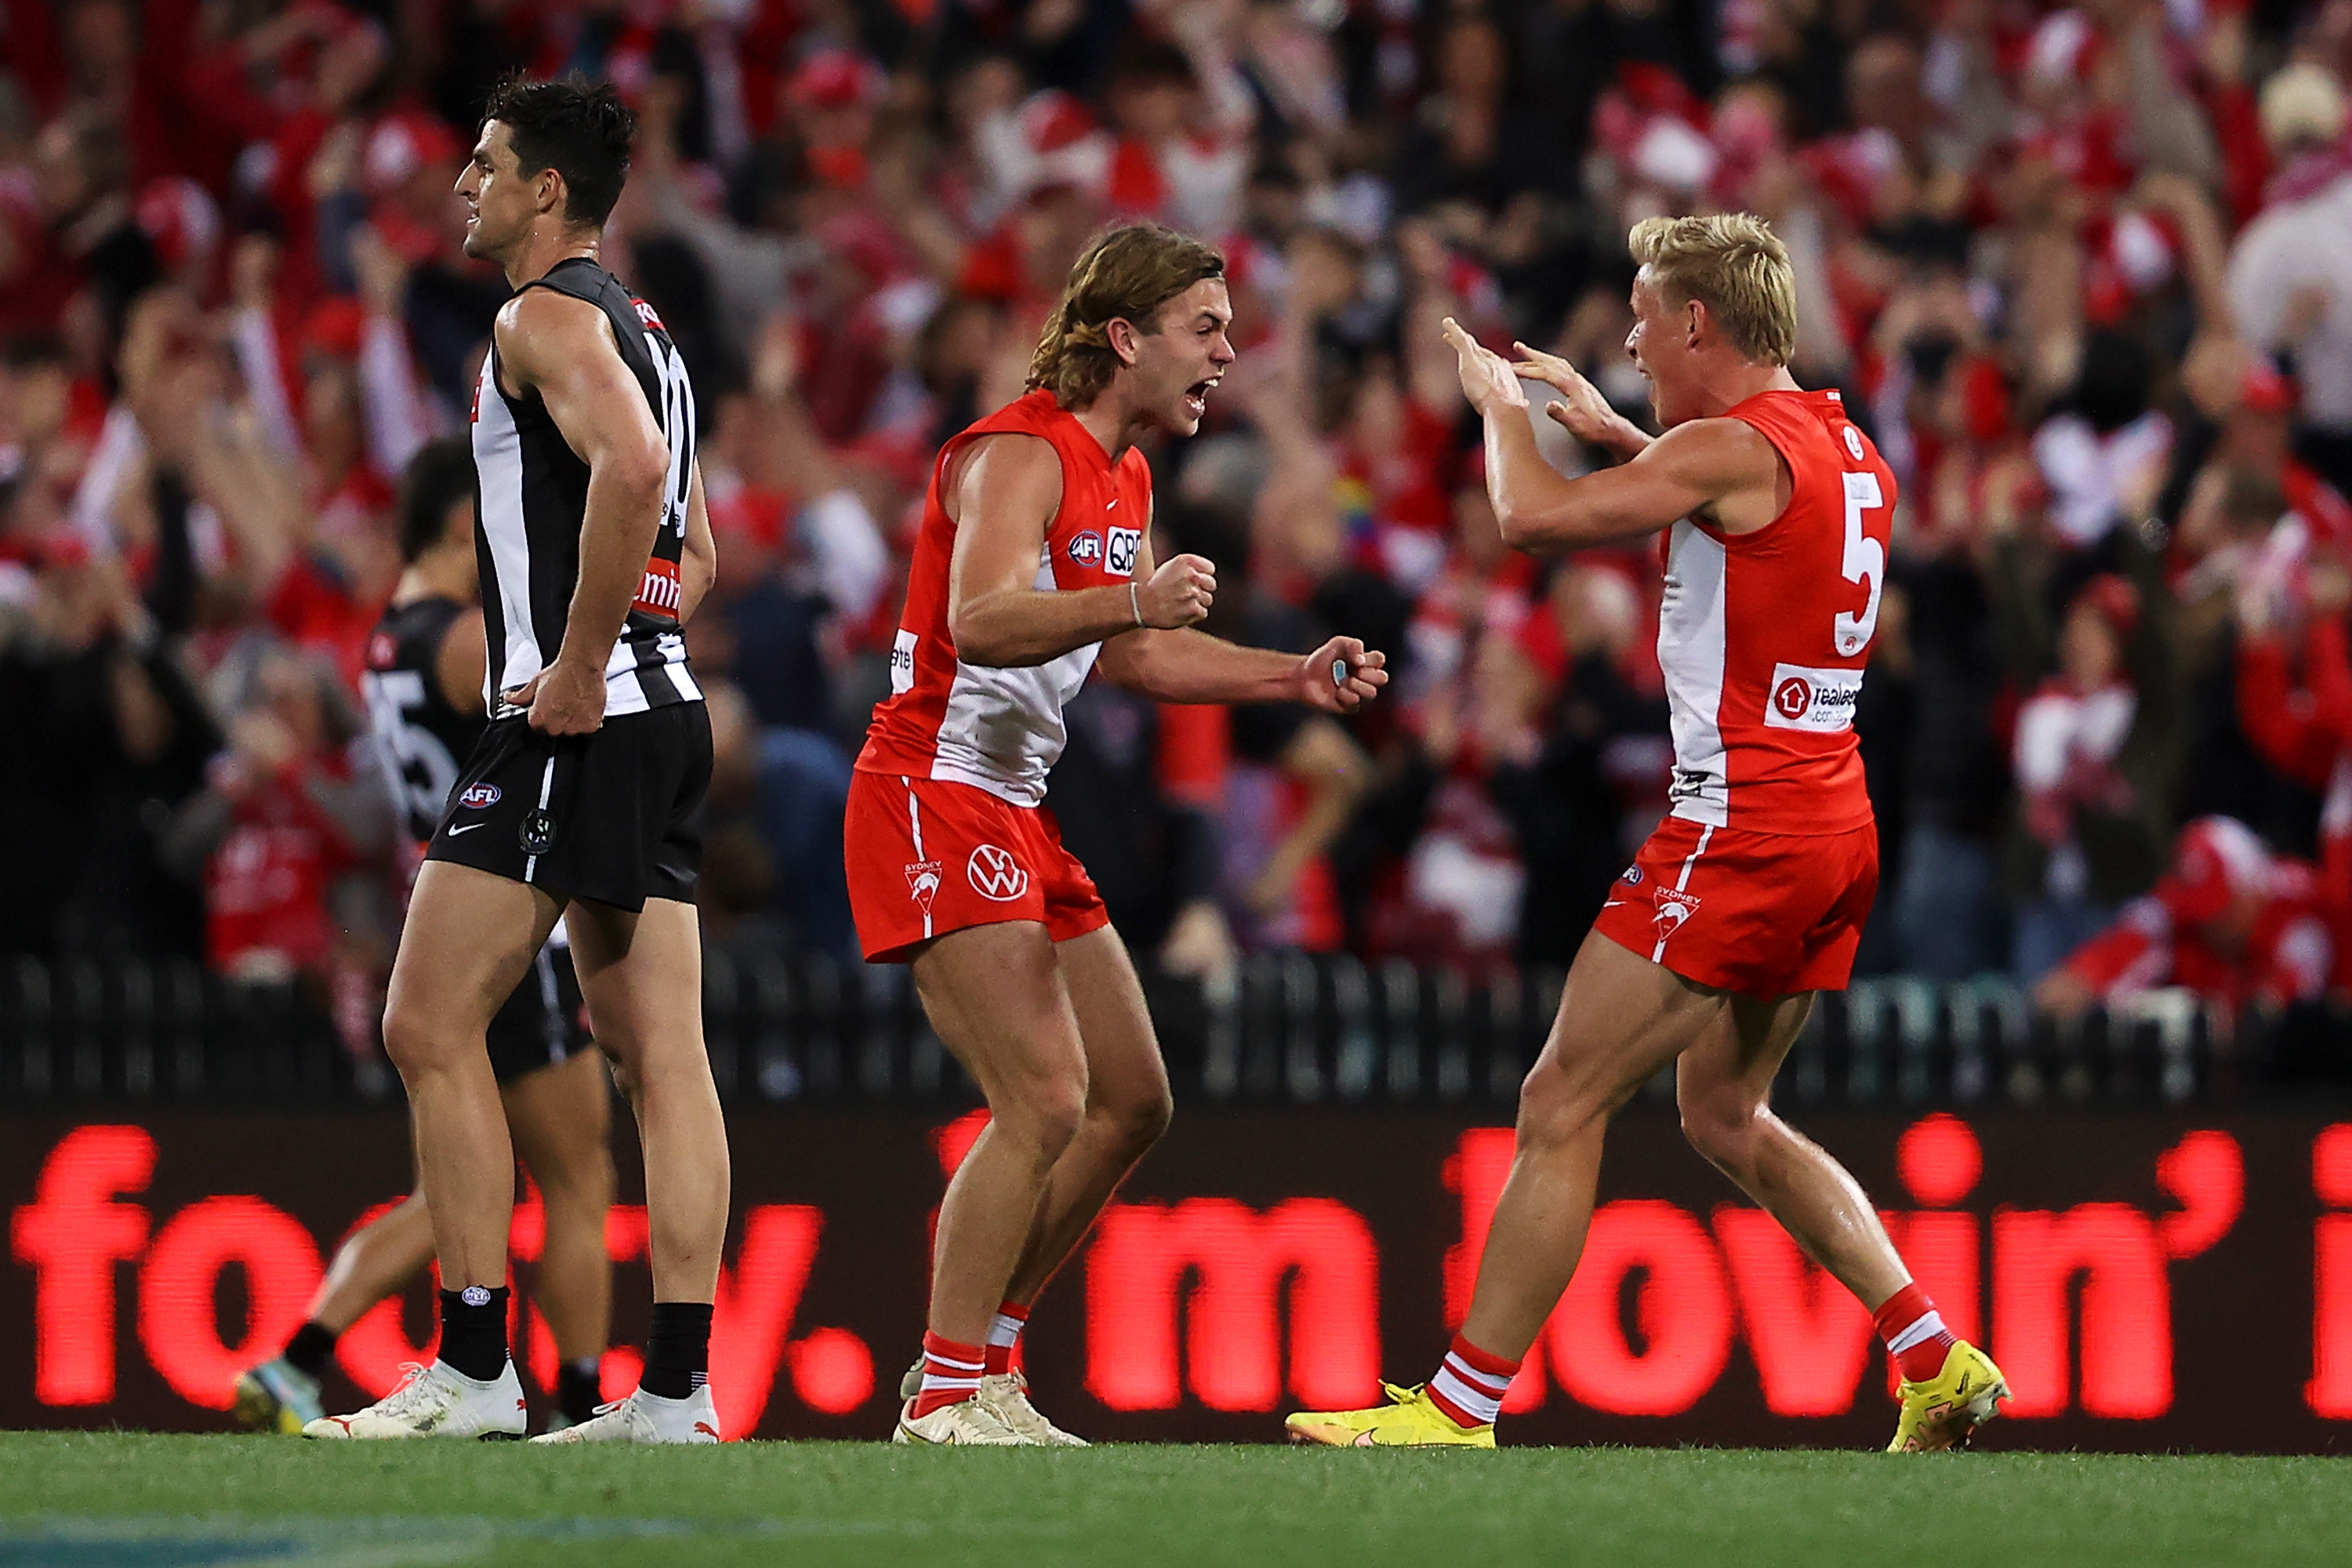 James Rowbottom and Isaac Heeney of the Swans celebrate victory over the Magpies.